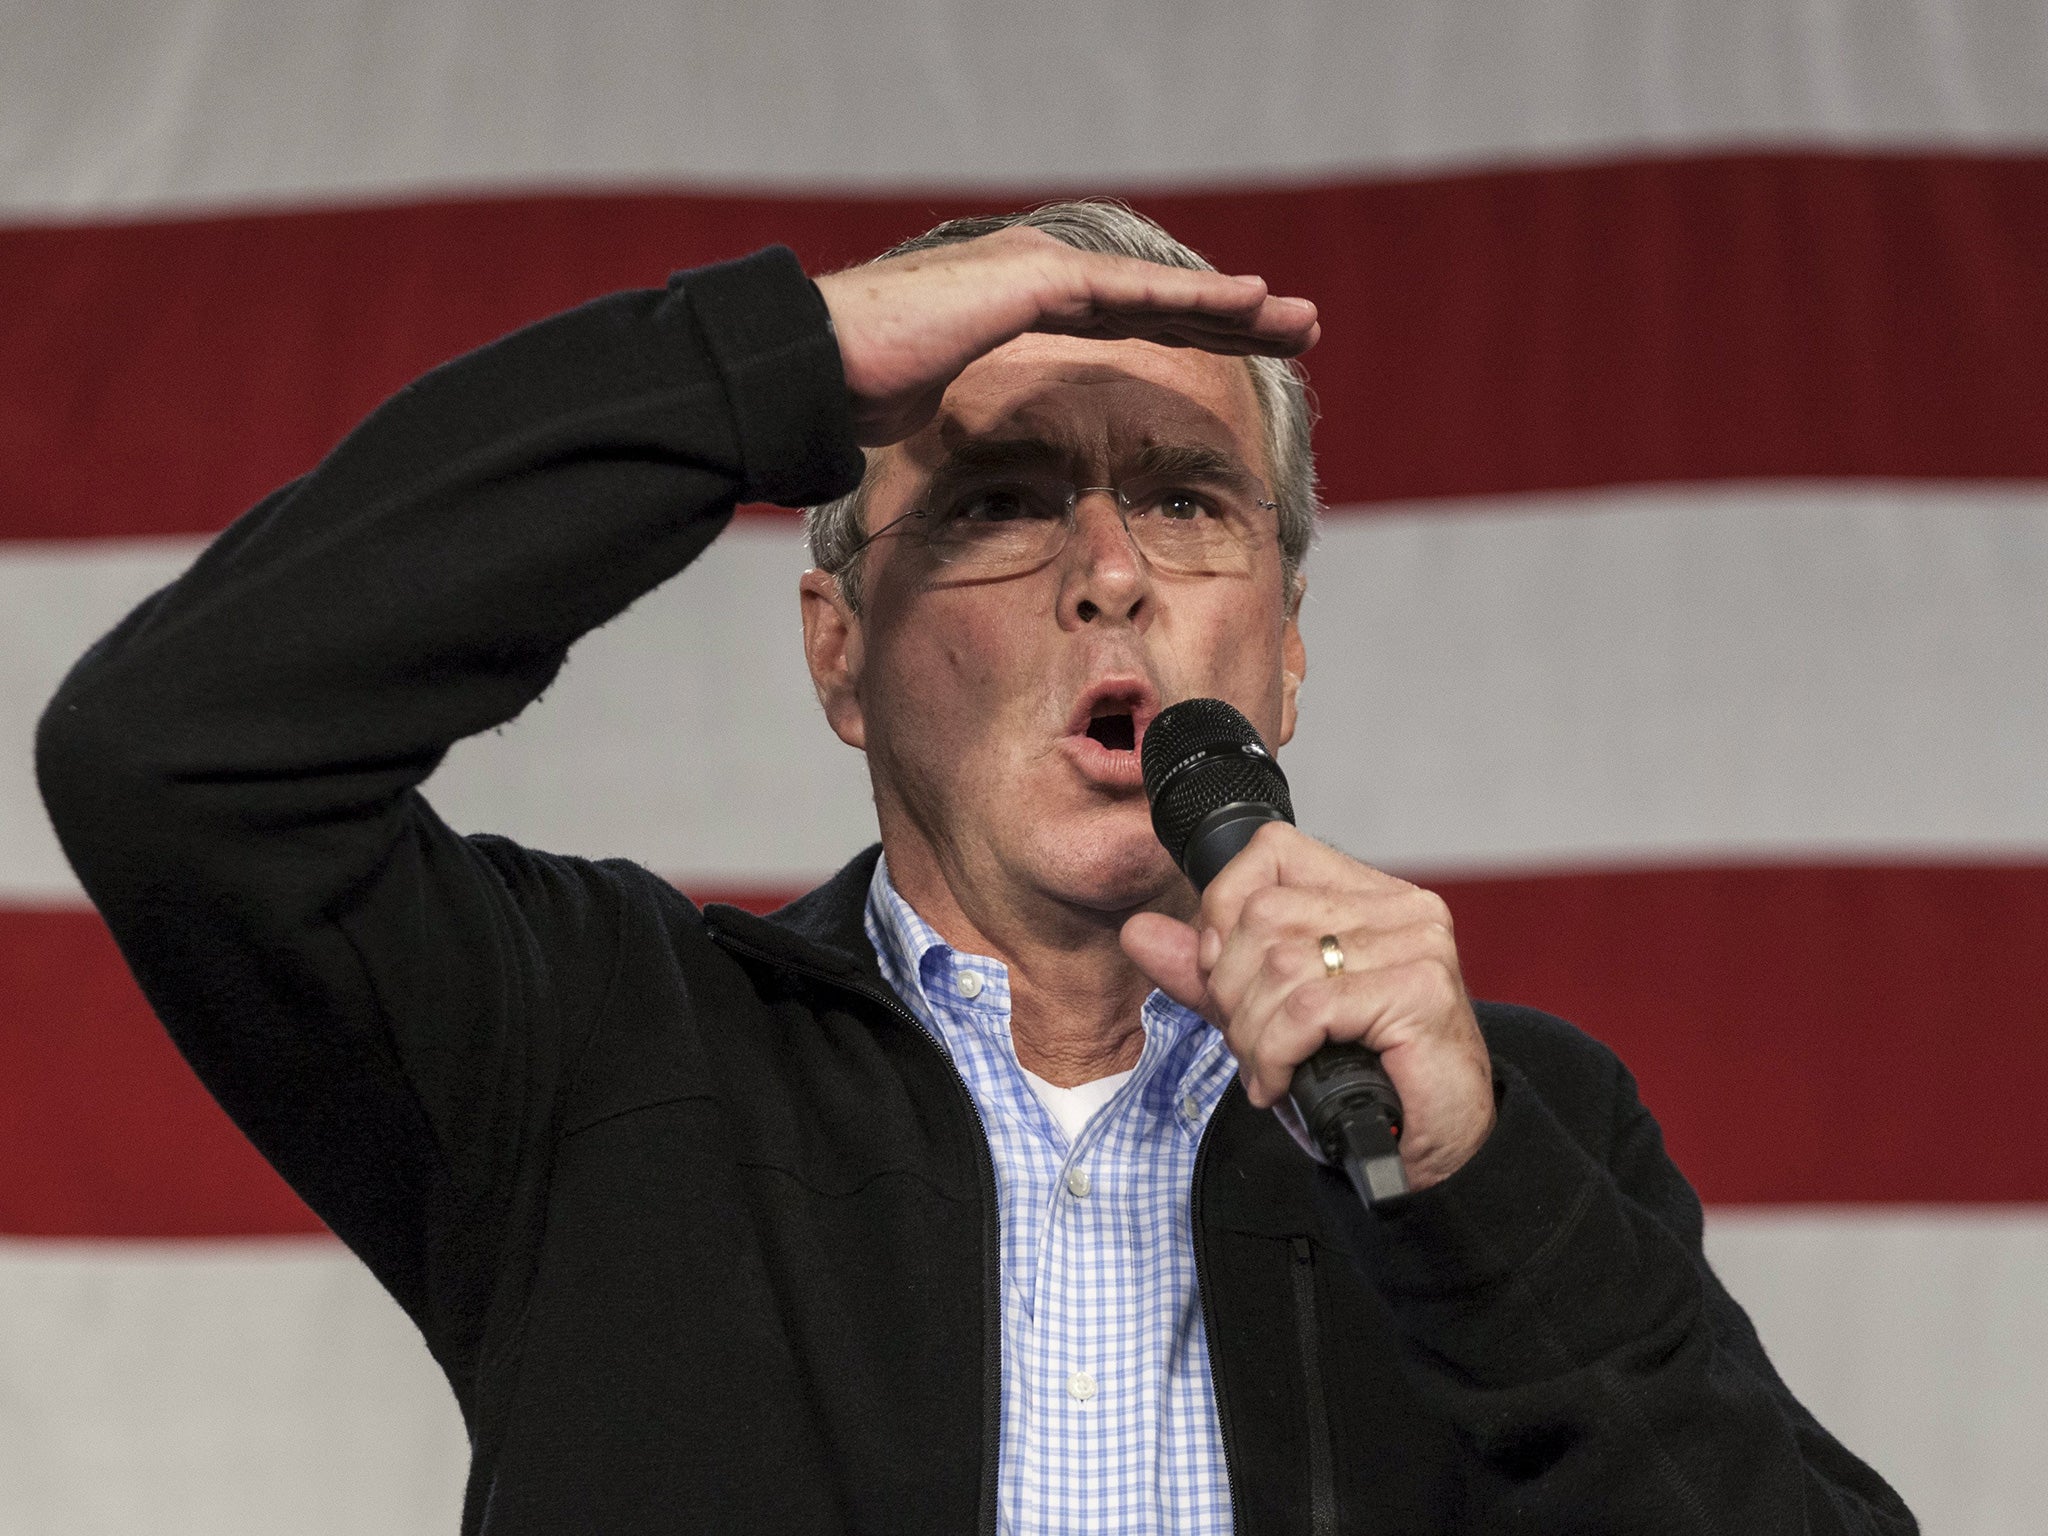 Jeb Bush has seen campaign funds dwindle from doubtful donors